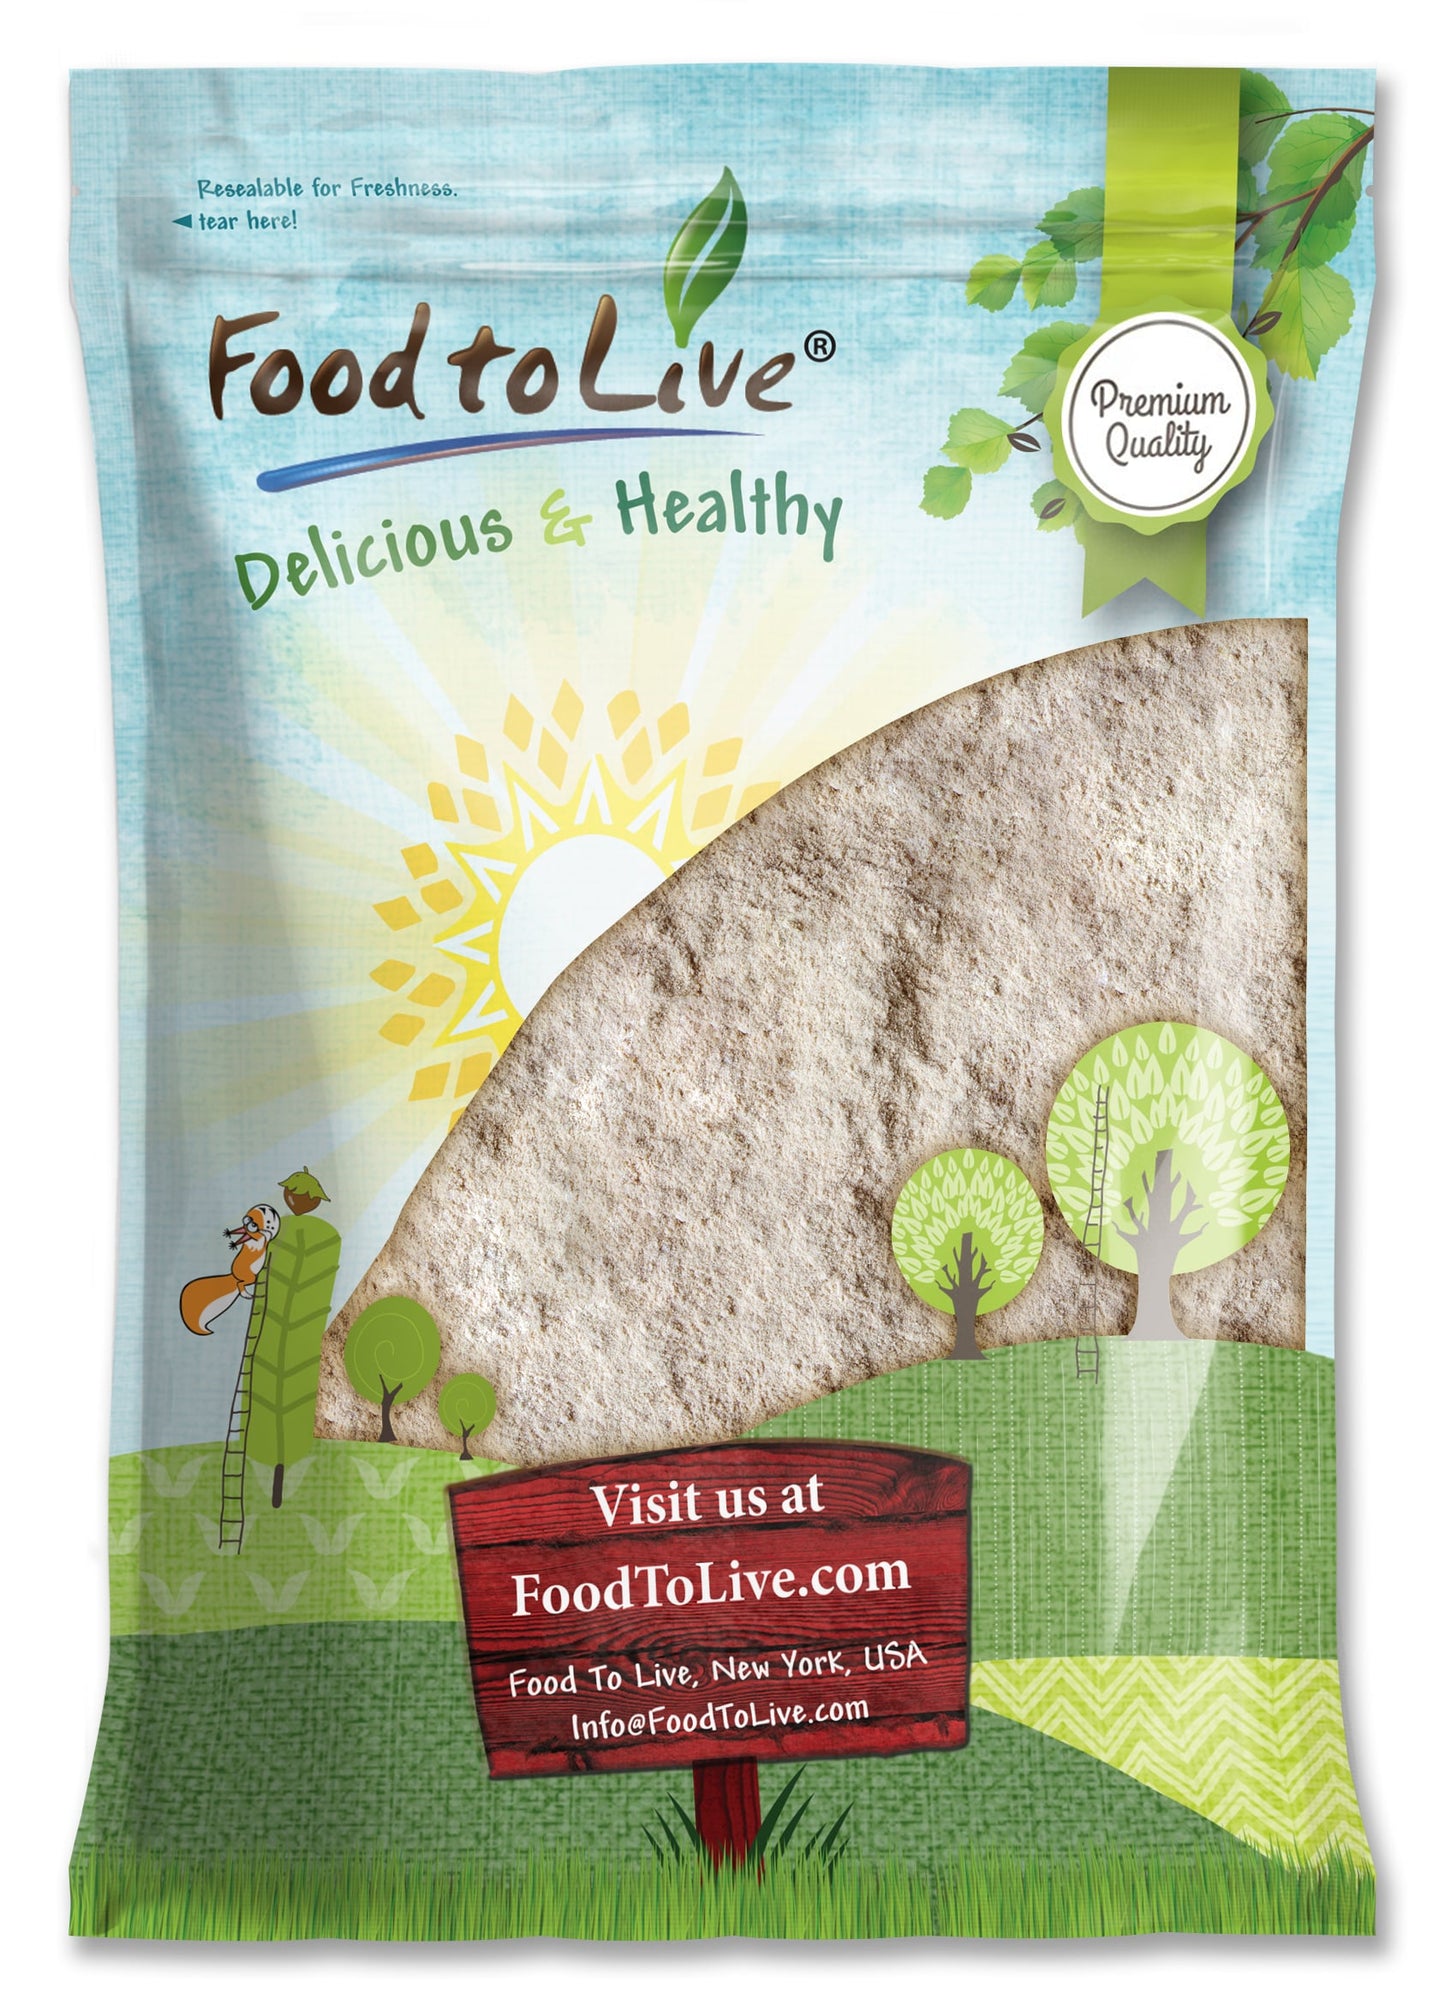 Barley Flour - Non-GMO Verified, Stone Ground from Whole Hulled Barley, Kosher, Vegan, Bulk, Great for Baking, Product of the USA - by Food to Live